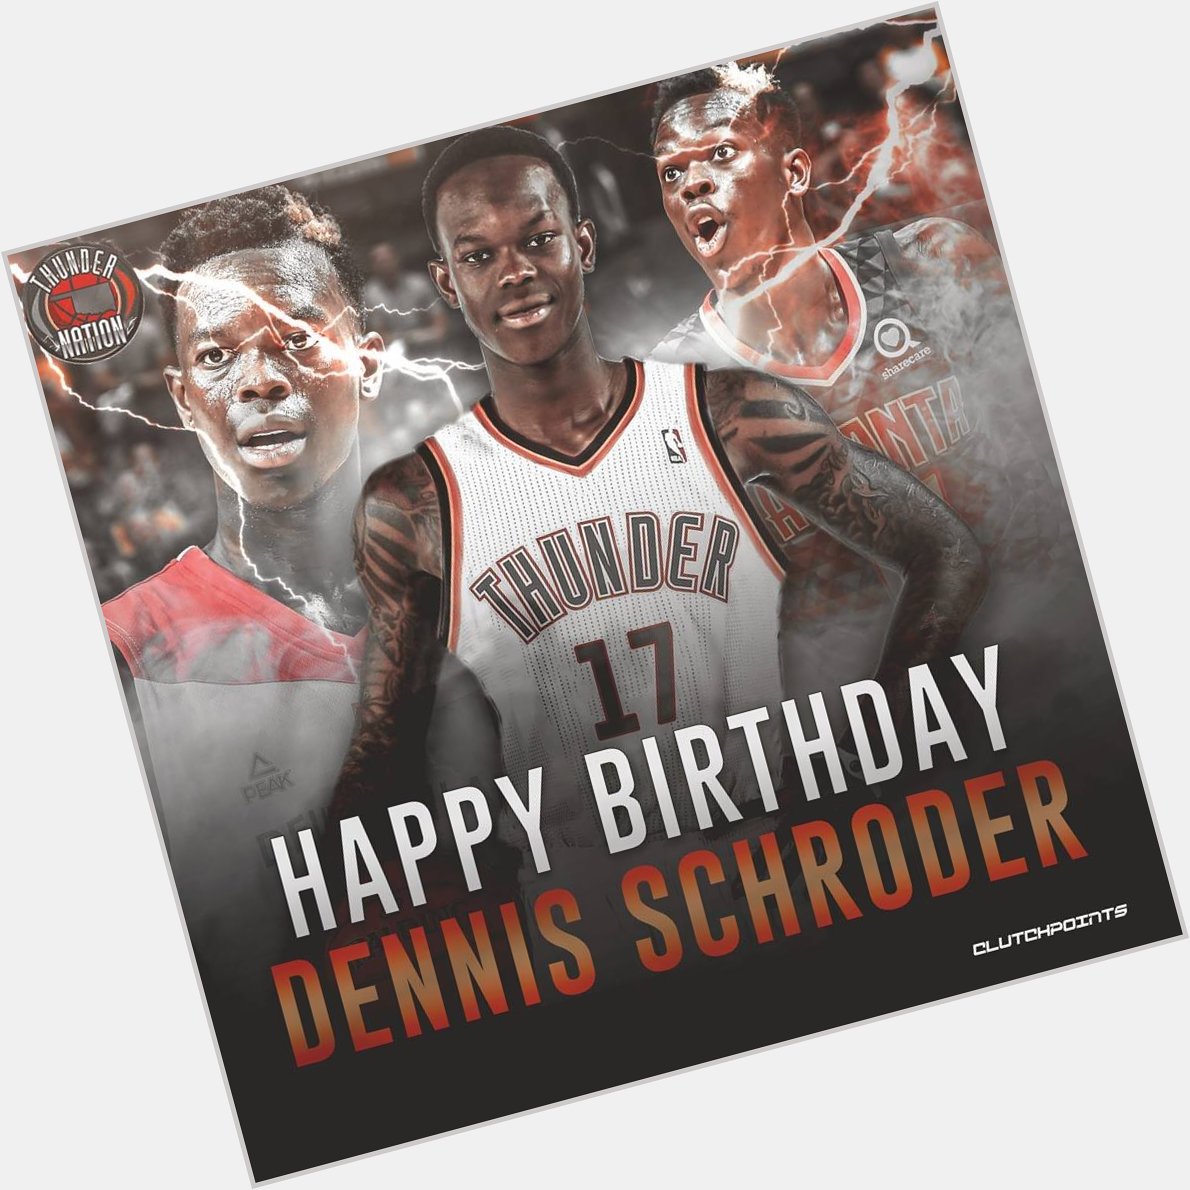 Join us in wishing our new member Dennis Schroder a happy 25th birthday  